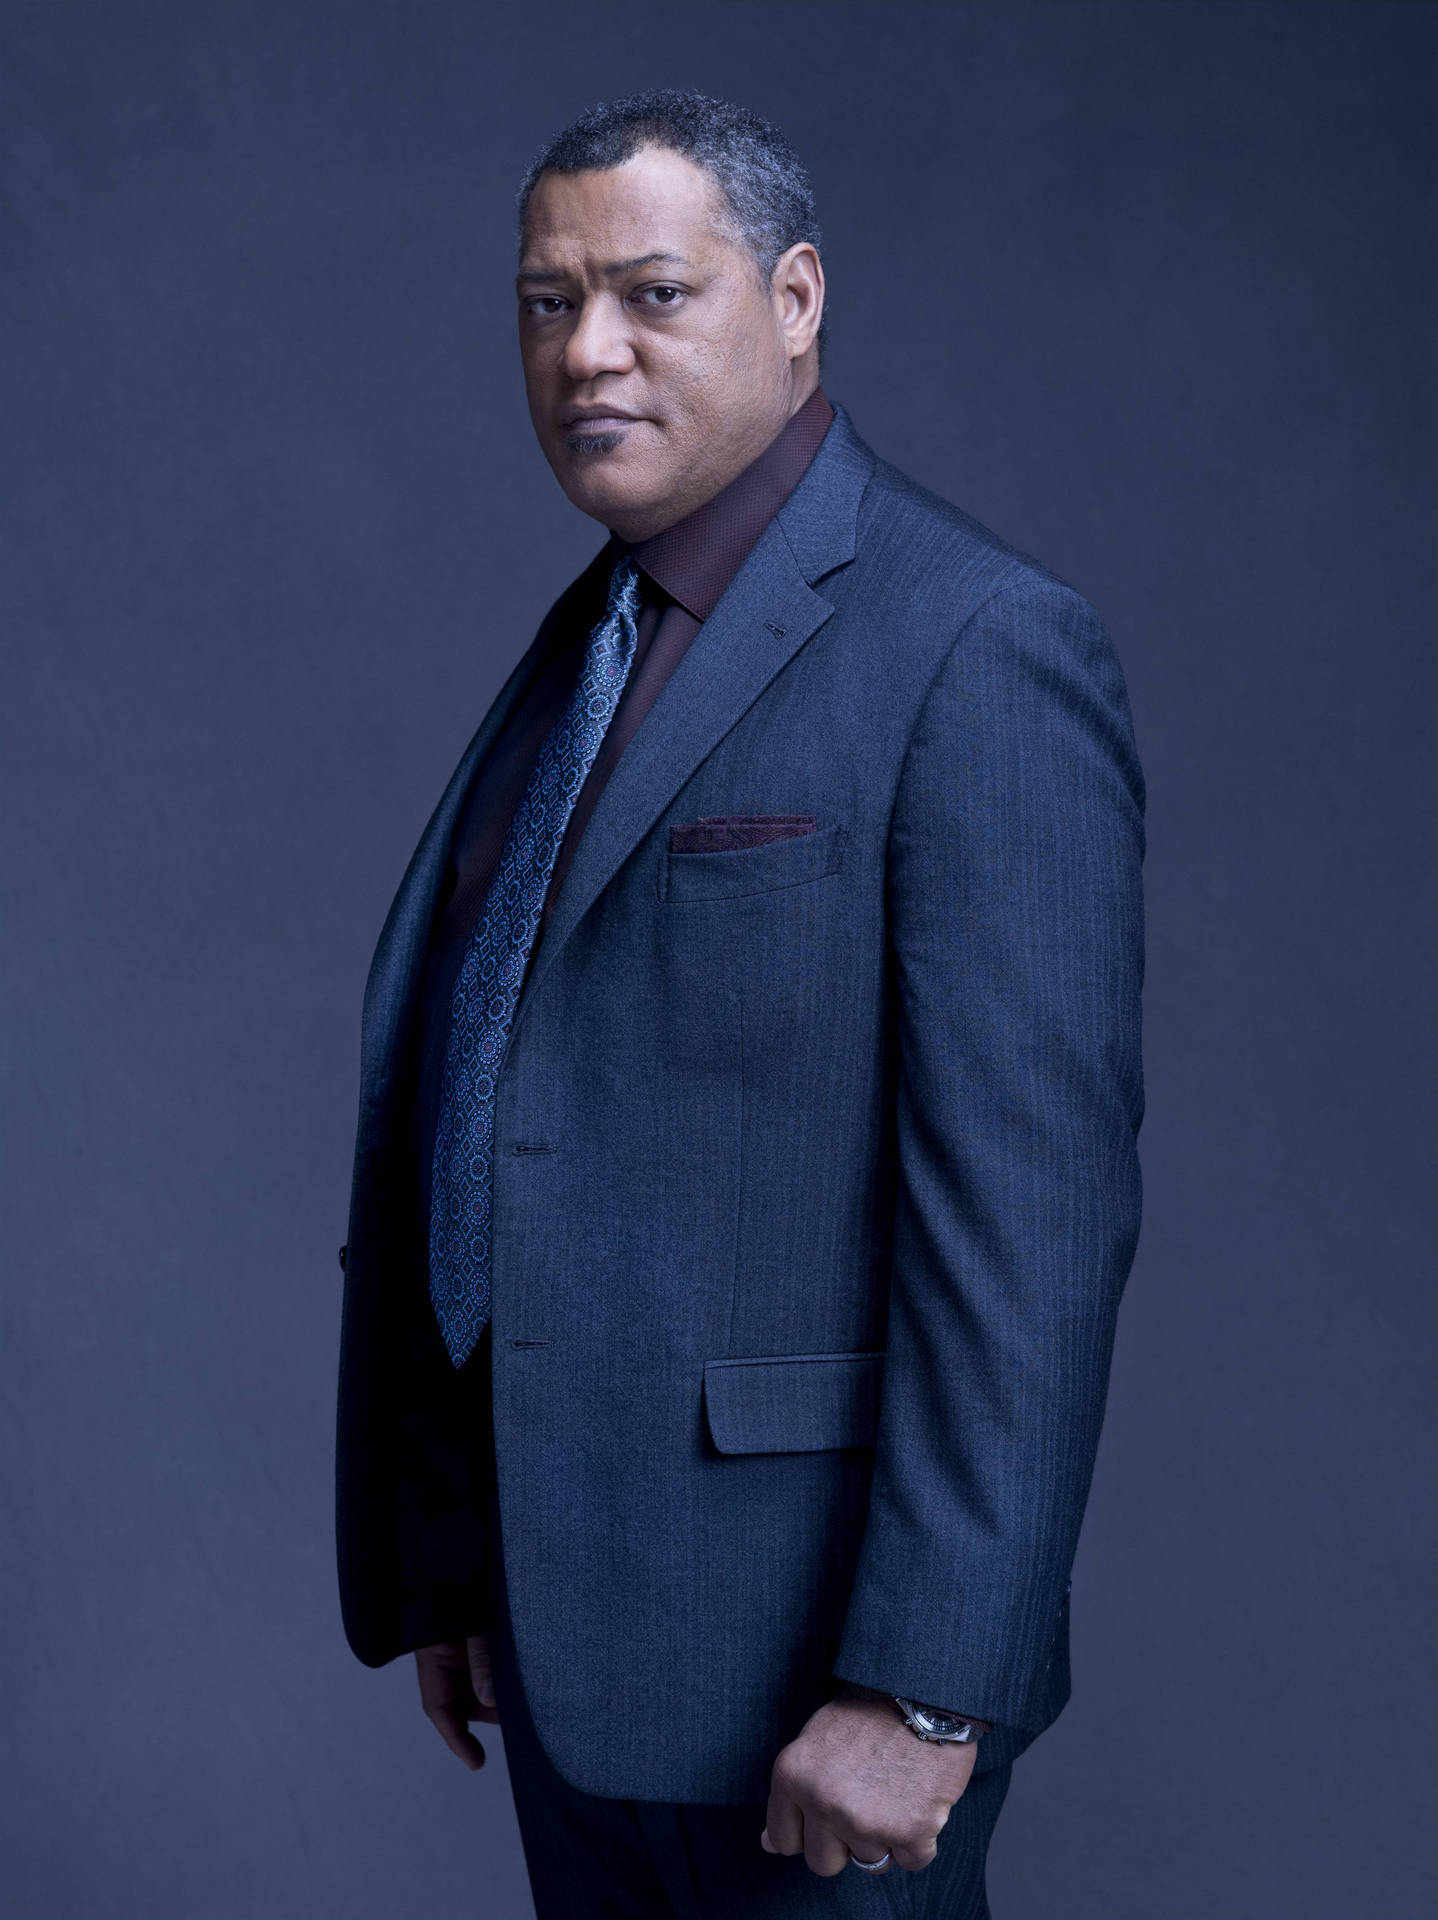 Laurence Fishburne Side View Photo Wallpaper